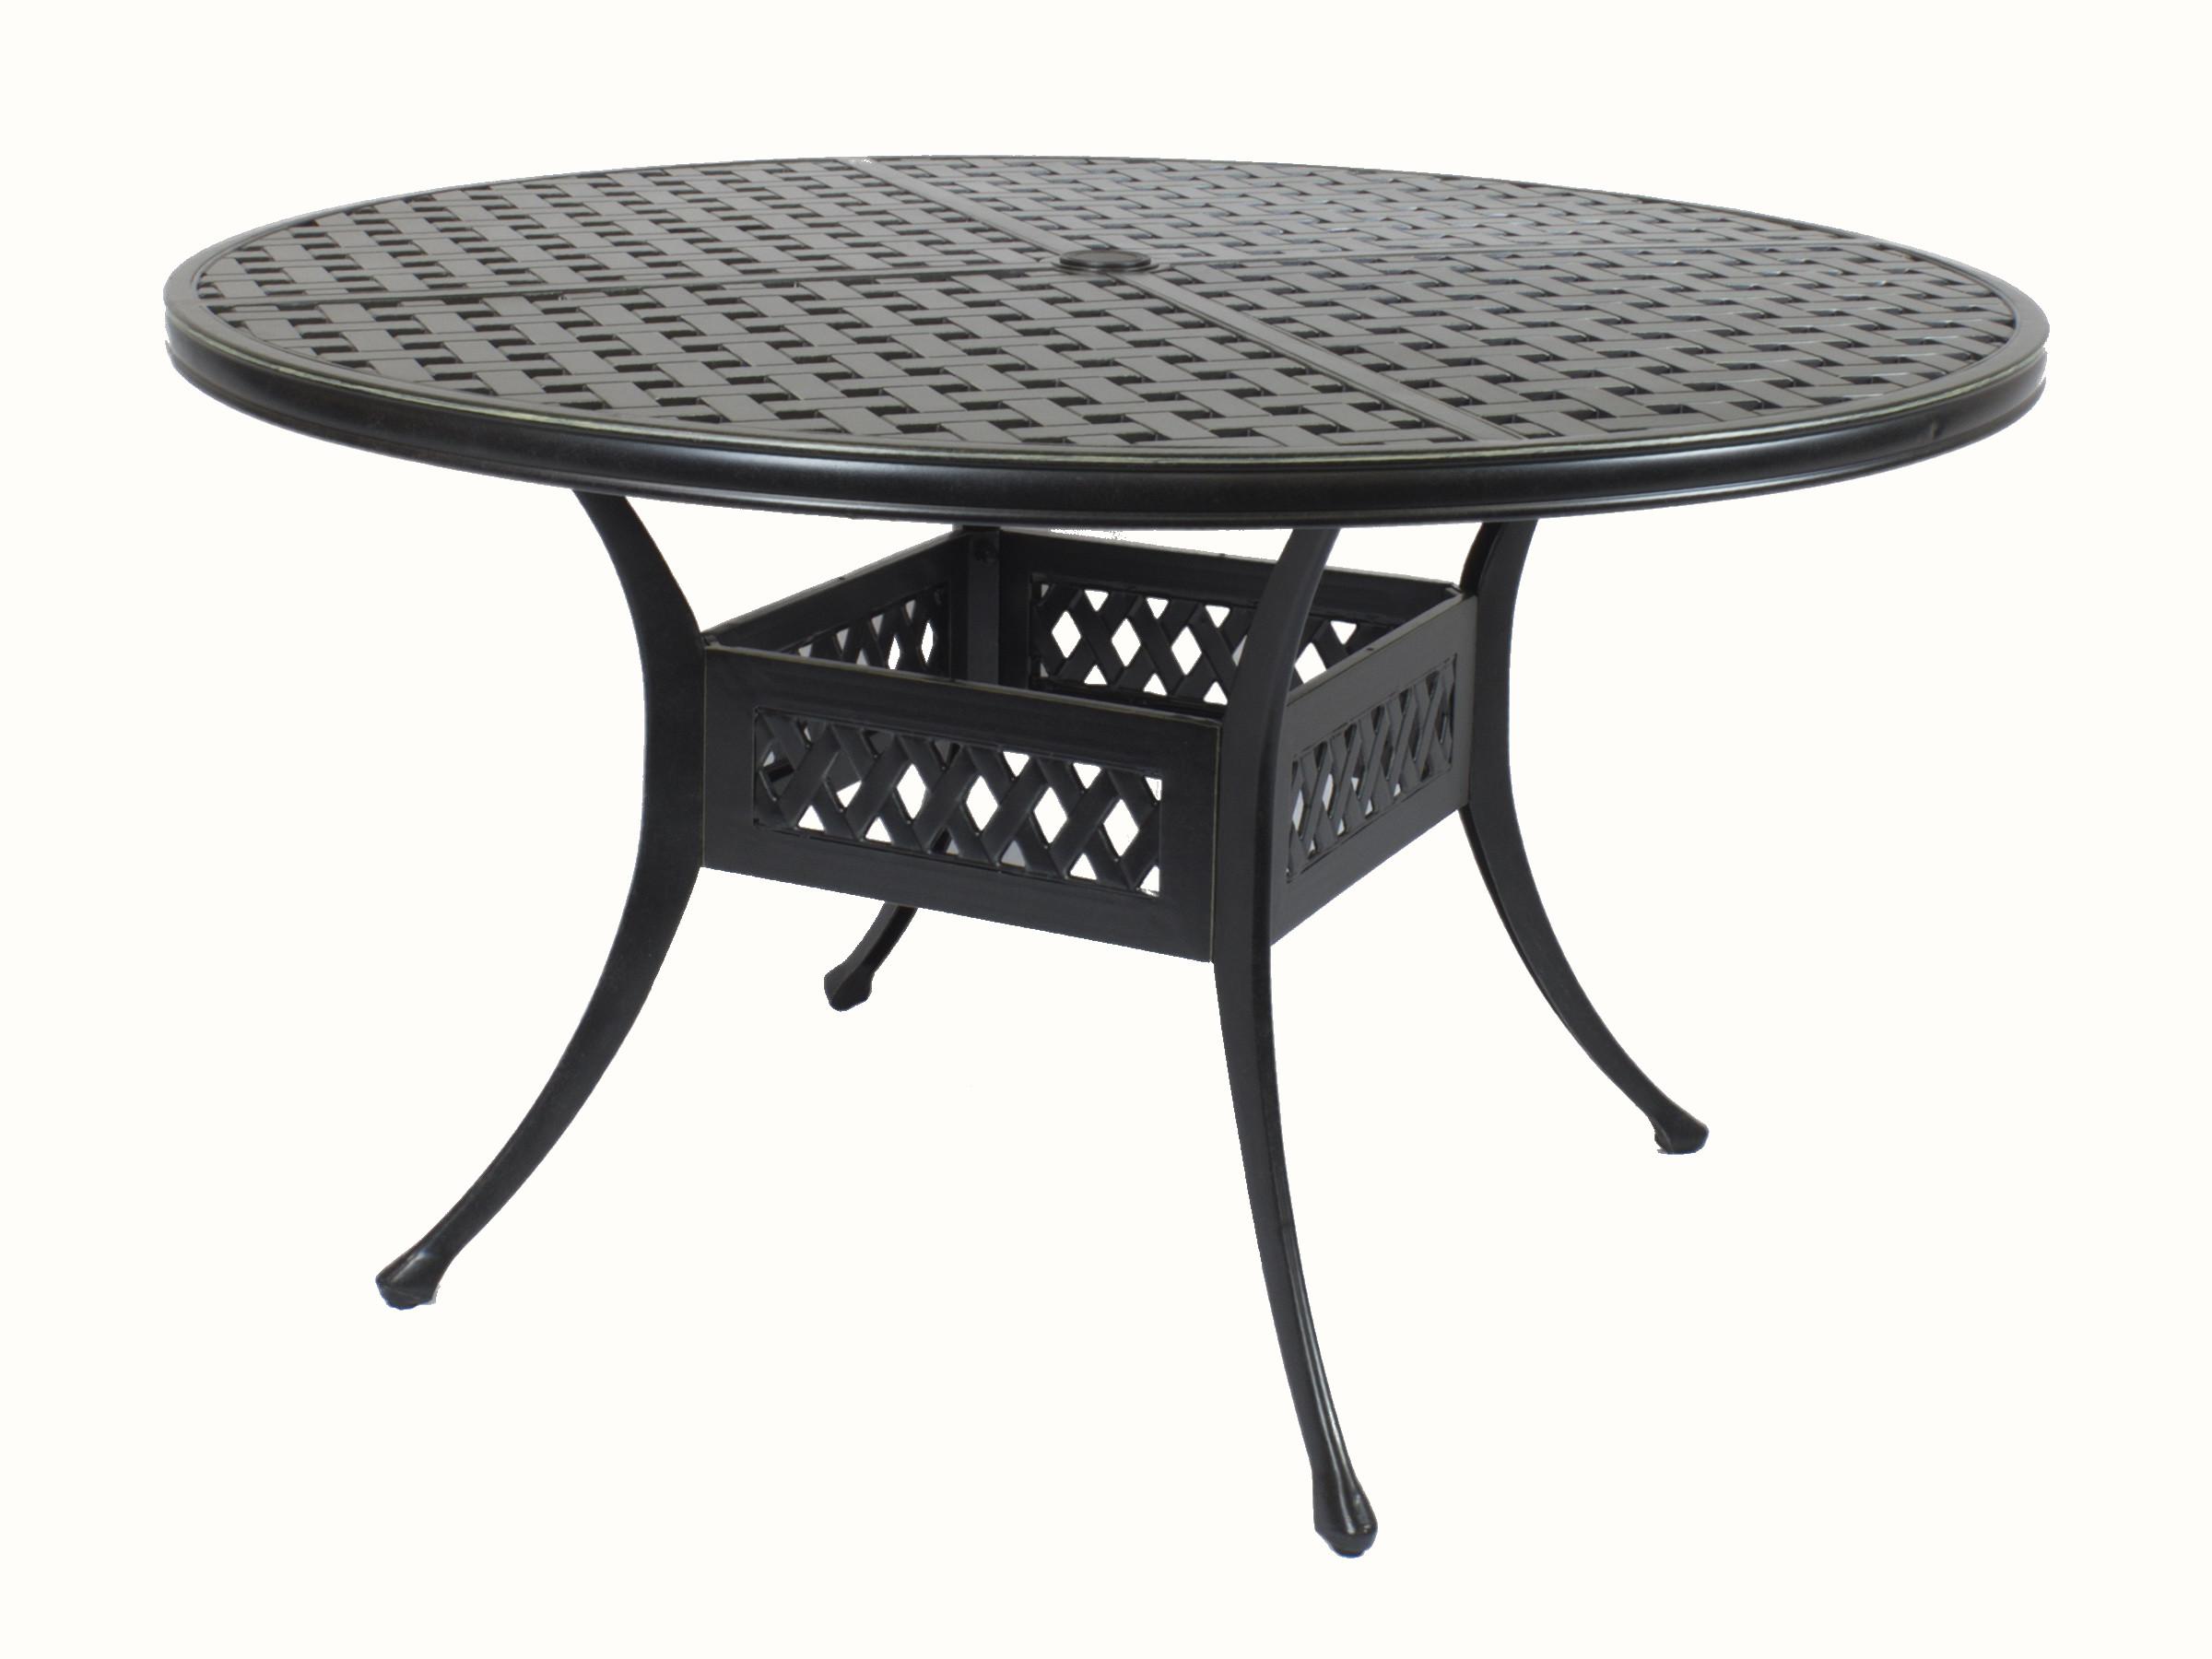 

    
St. Tropez Cast Alumnium Fully Welded 52" Round Dining Table by CaliPatio
